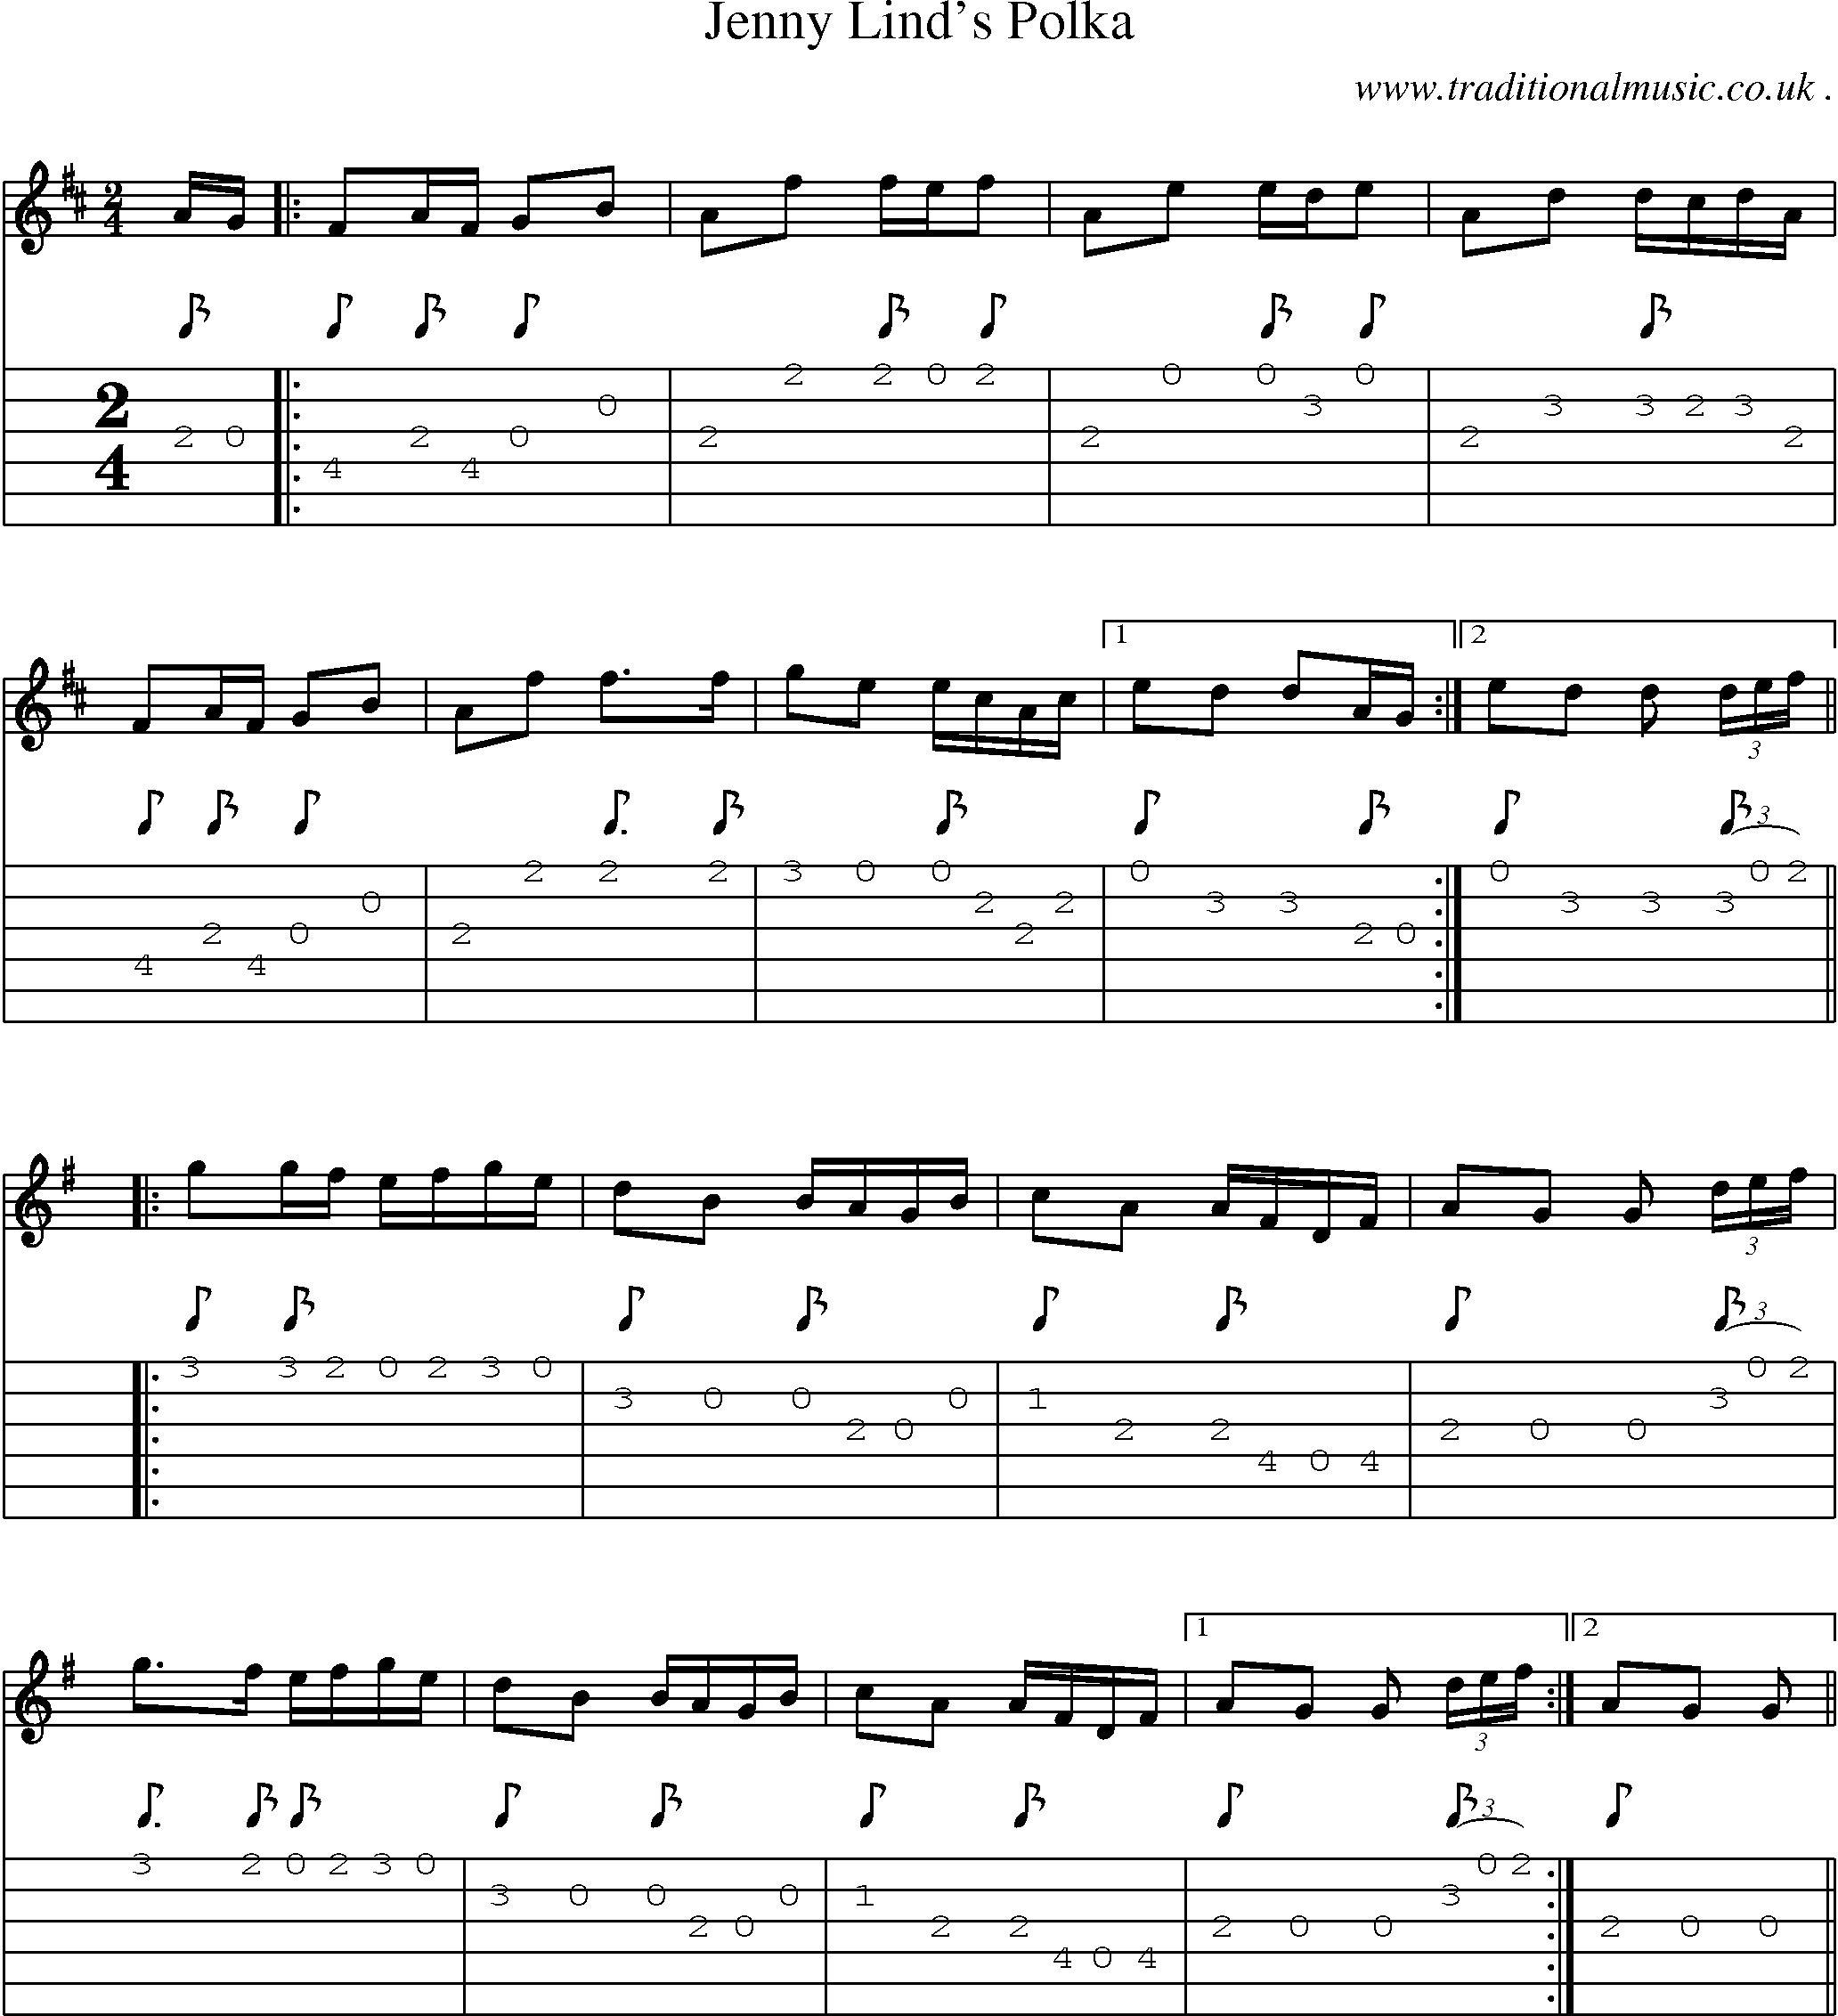 Sheet-Music and Guitar Tabs for Jenny Linds Polka